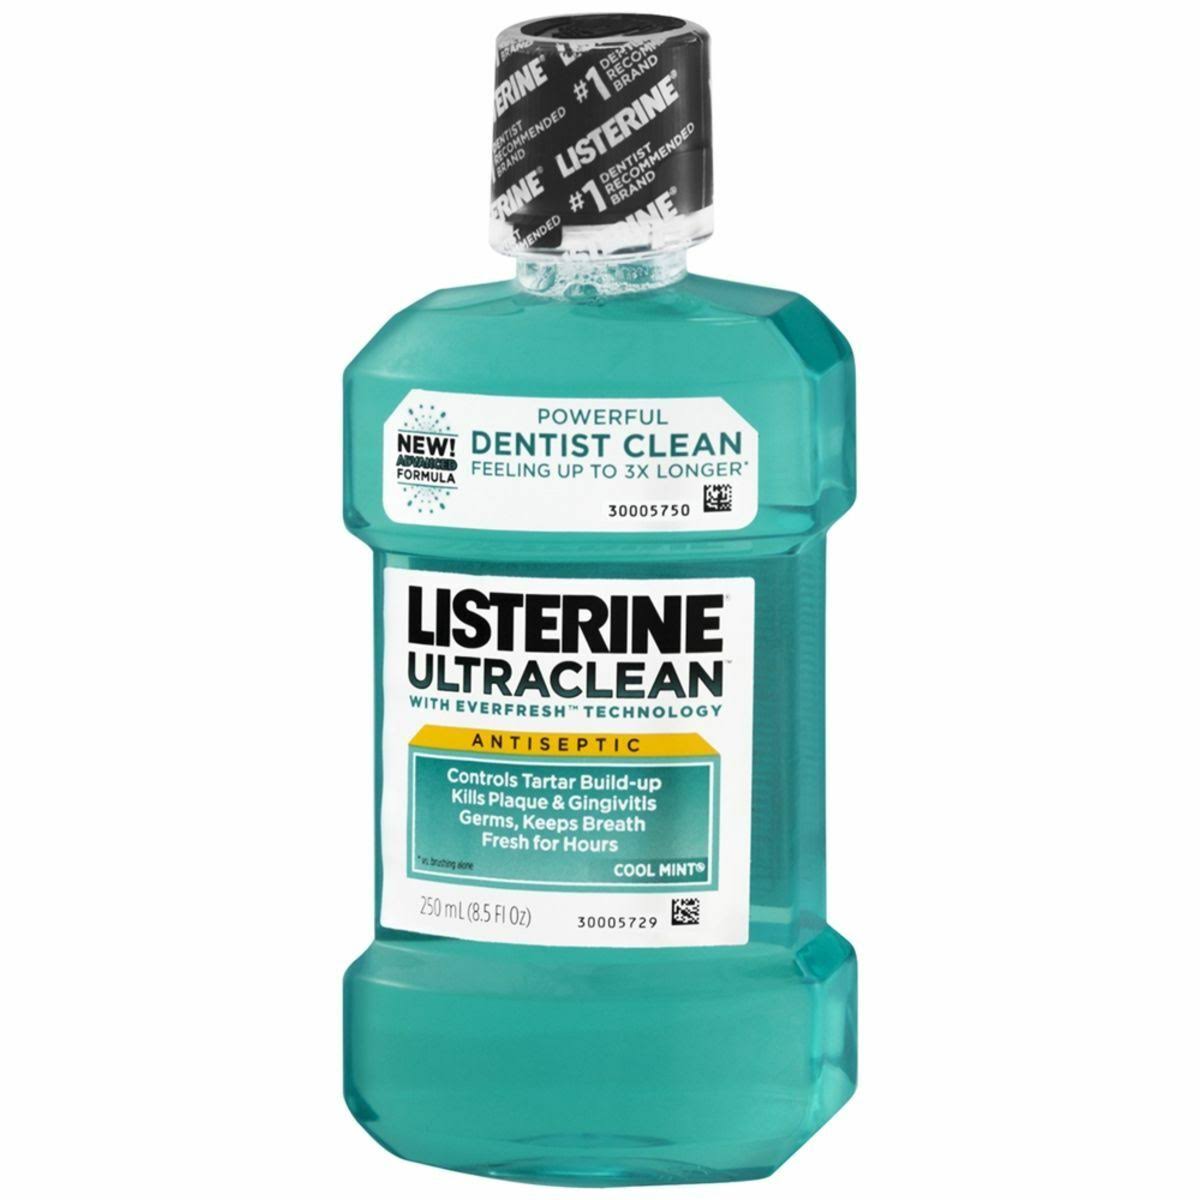 Listerine Ultra Clean Antiseptic Mouthwash - Cool Mint, 250ml